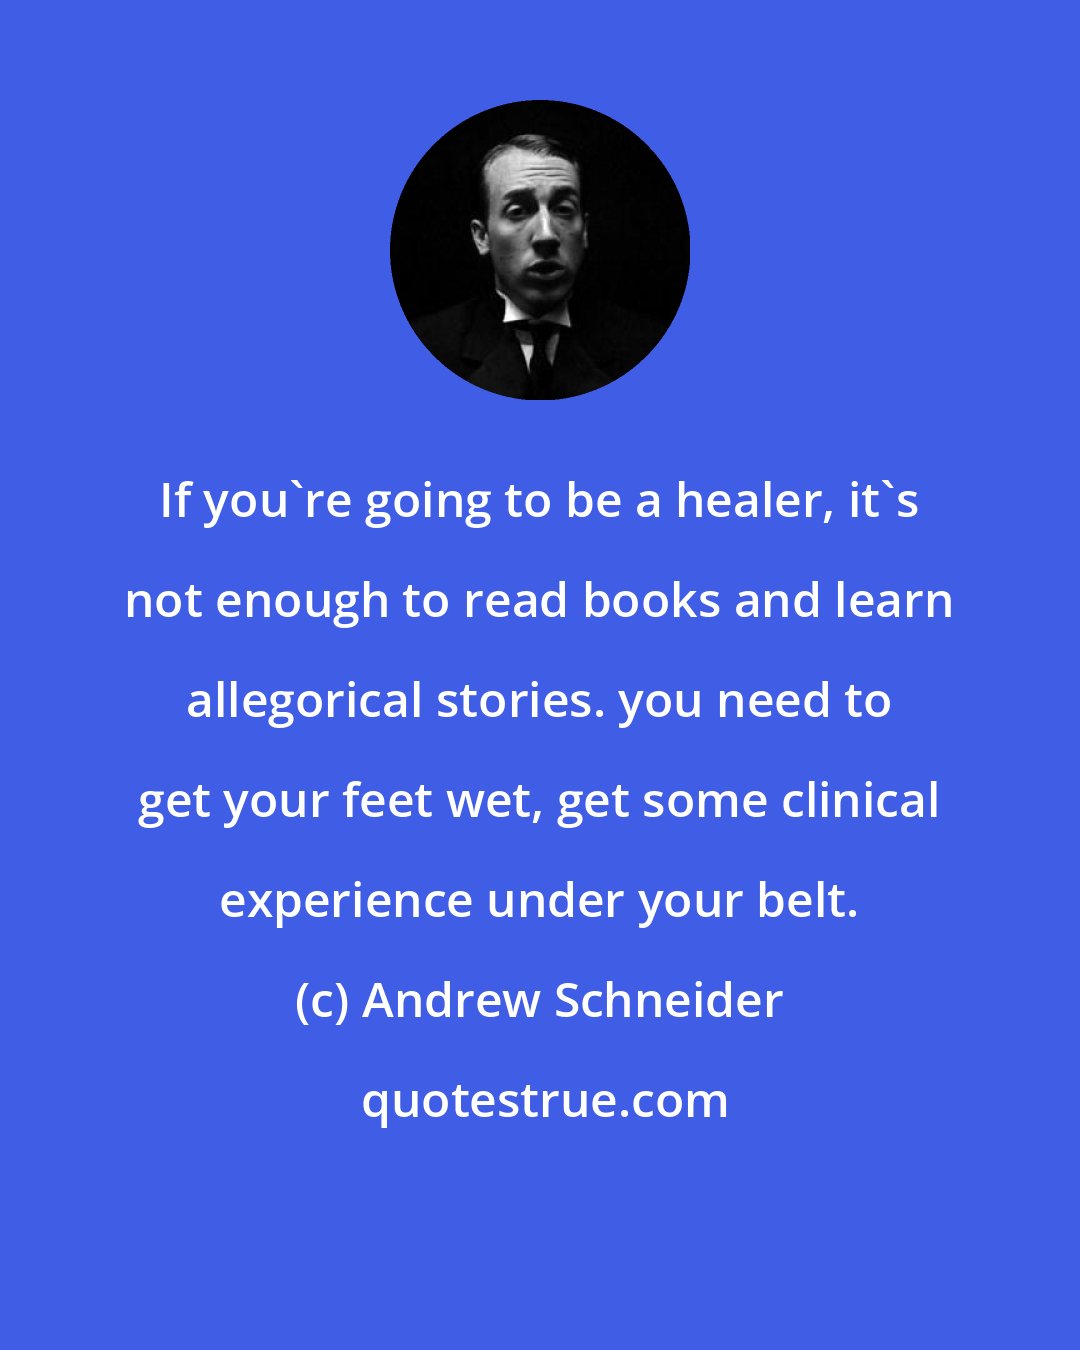 Andrew Schneider: If you're going to be a healer, it's not enough to read books and learn allegorical stories. you need to get your feet wet, get some clinical experience under your belt.